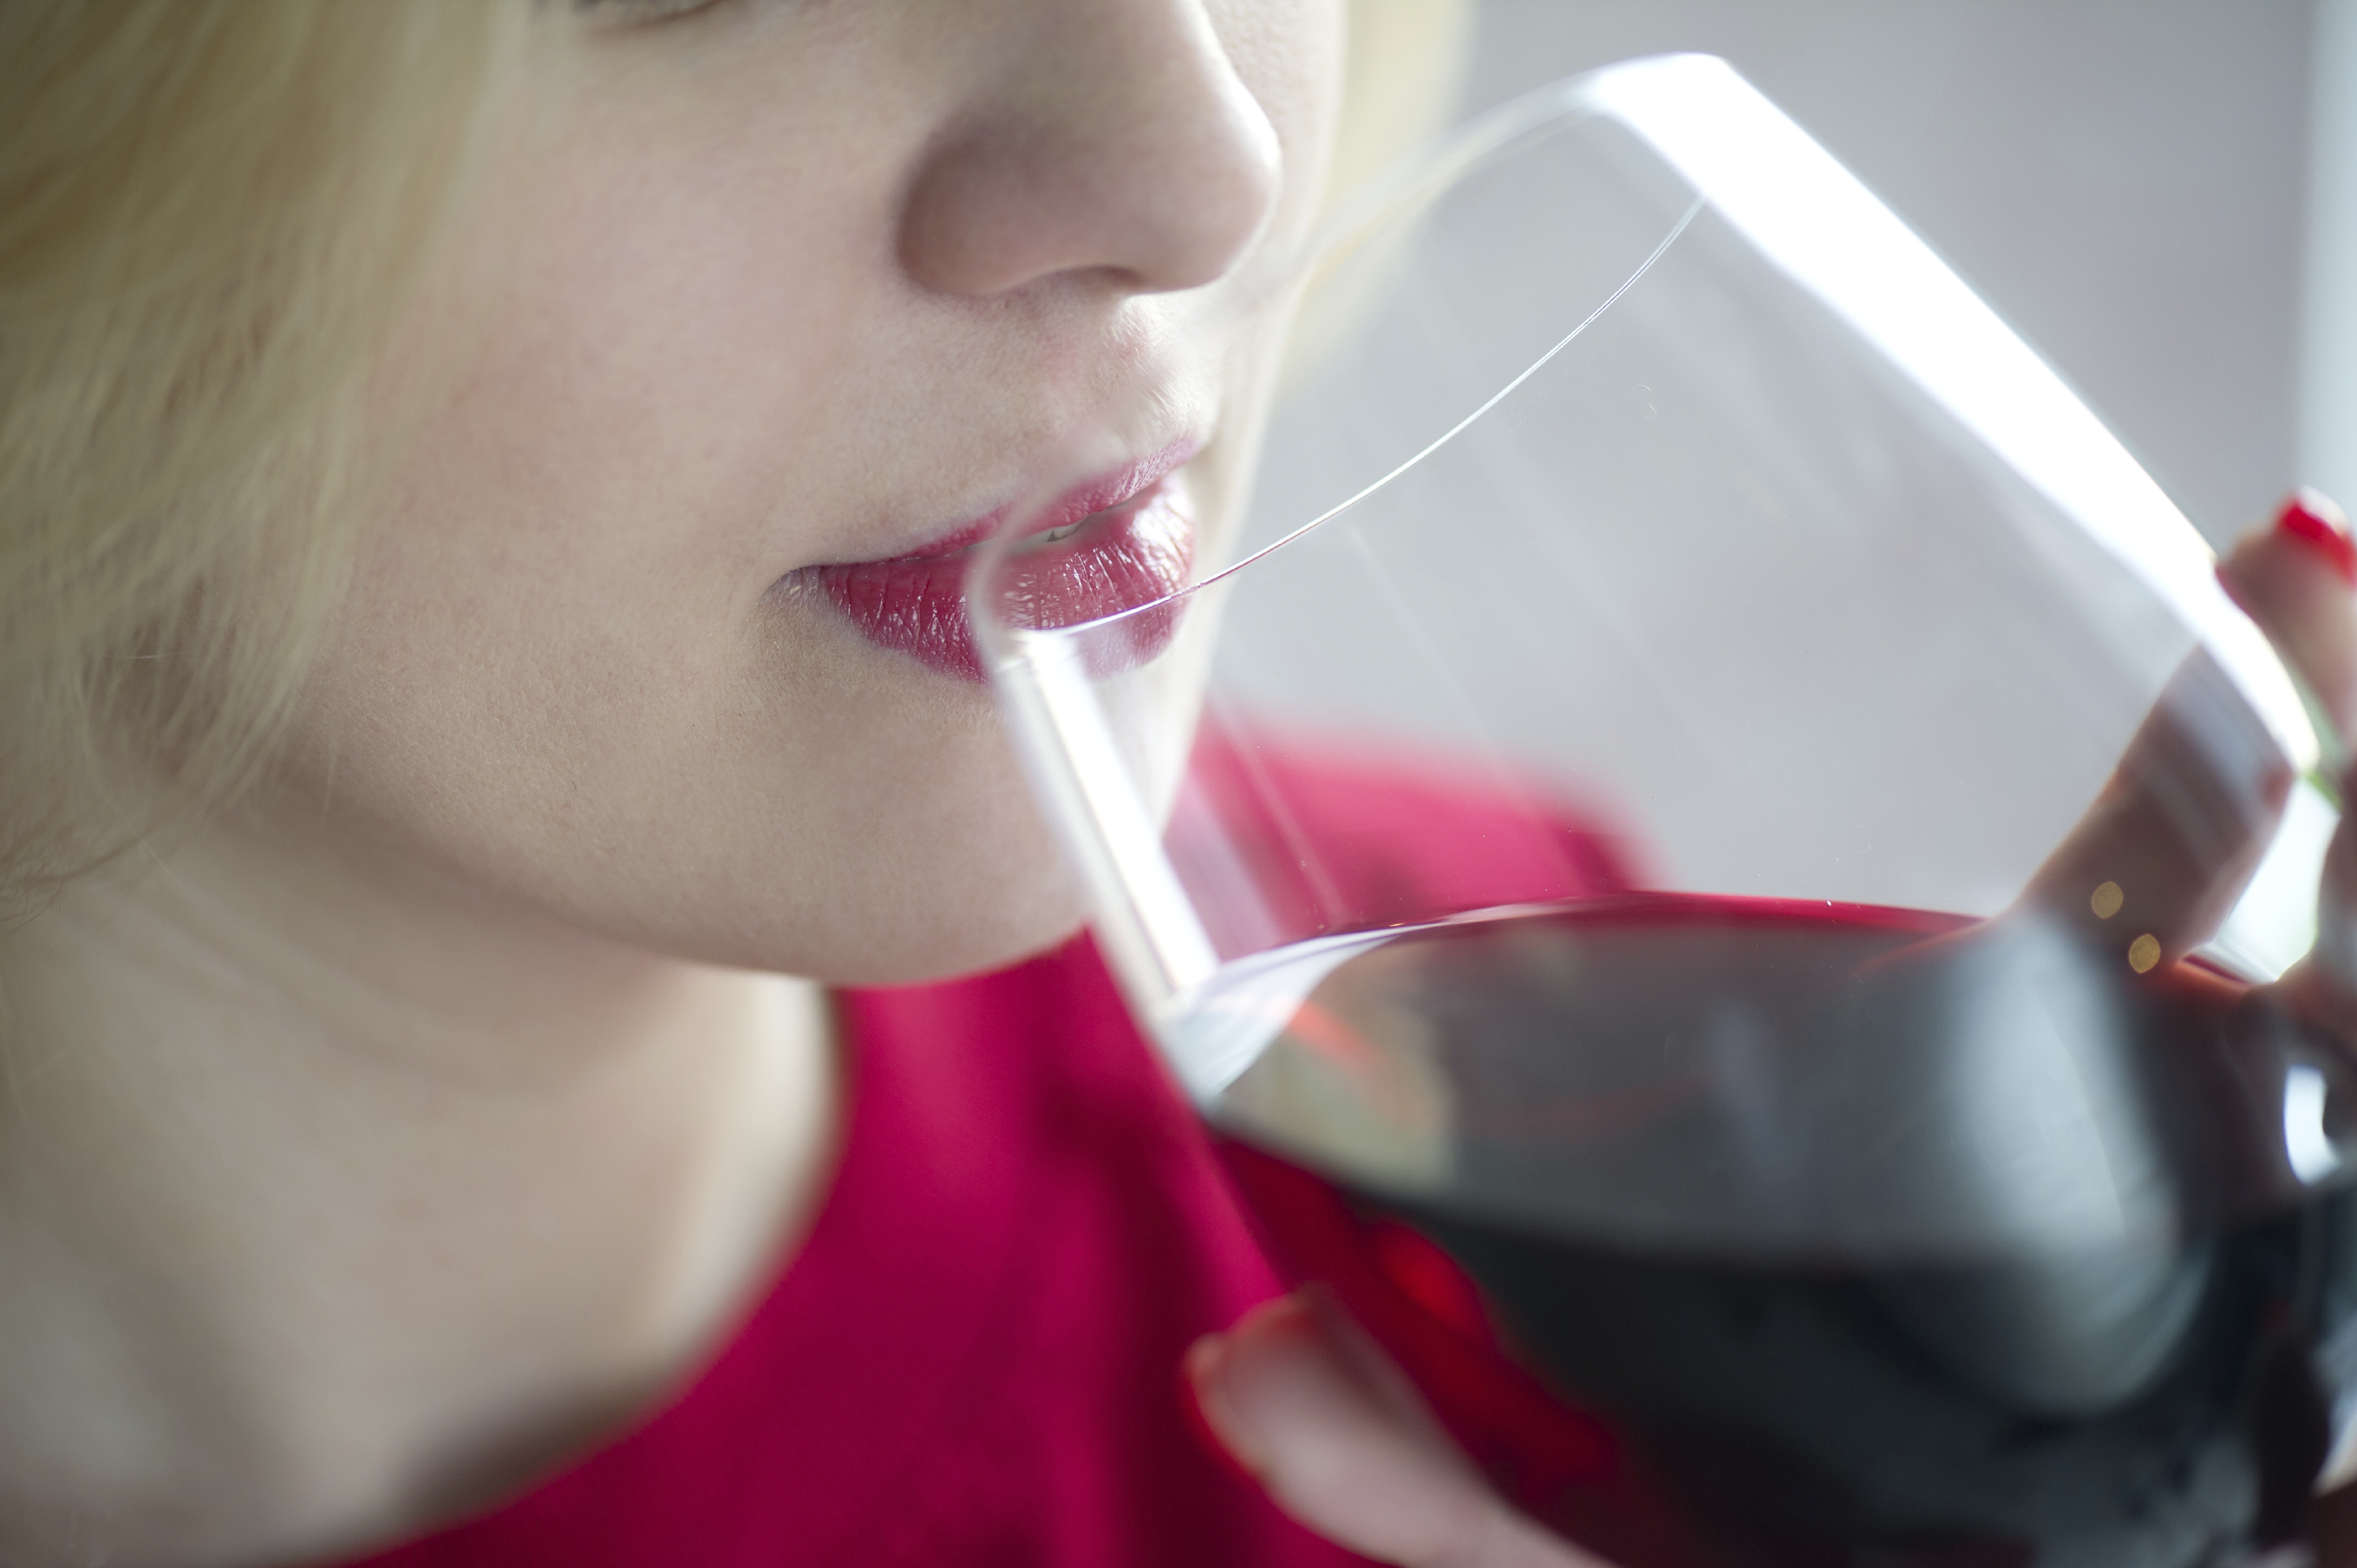 Woman drinking a glass of wine.